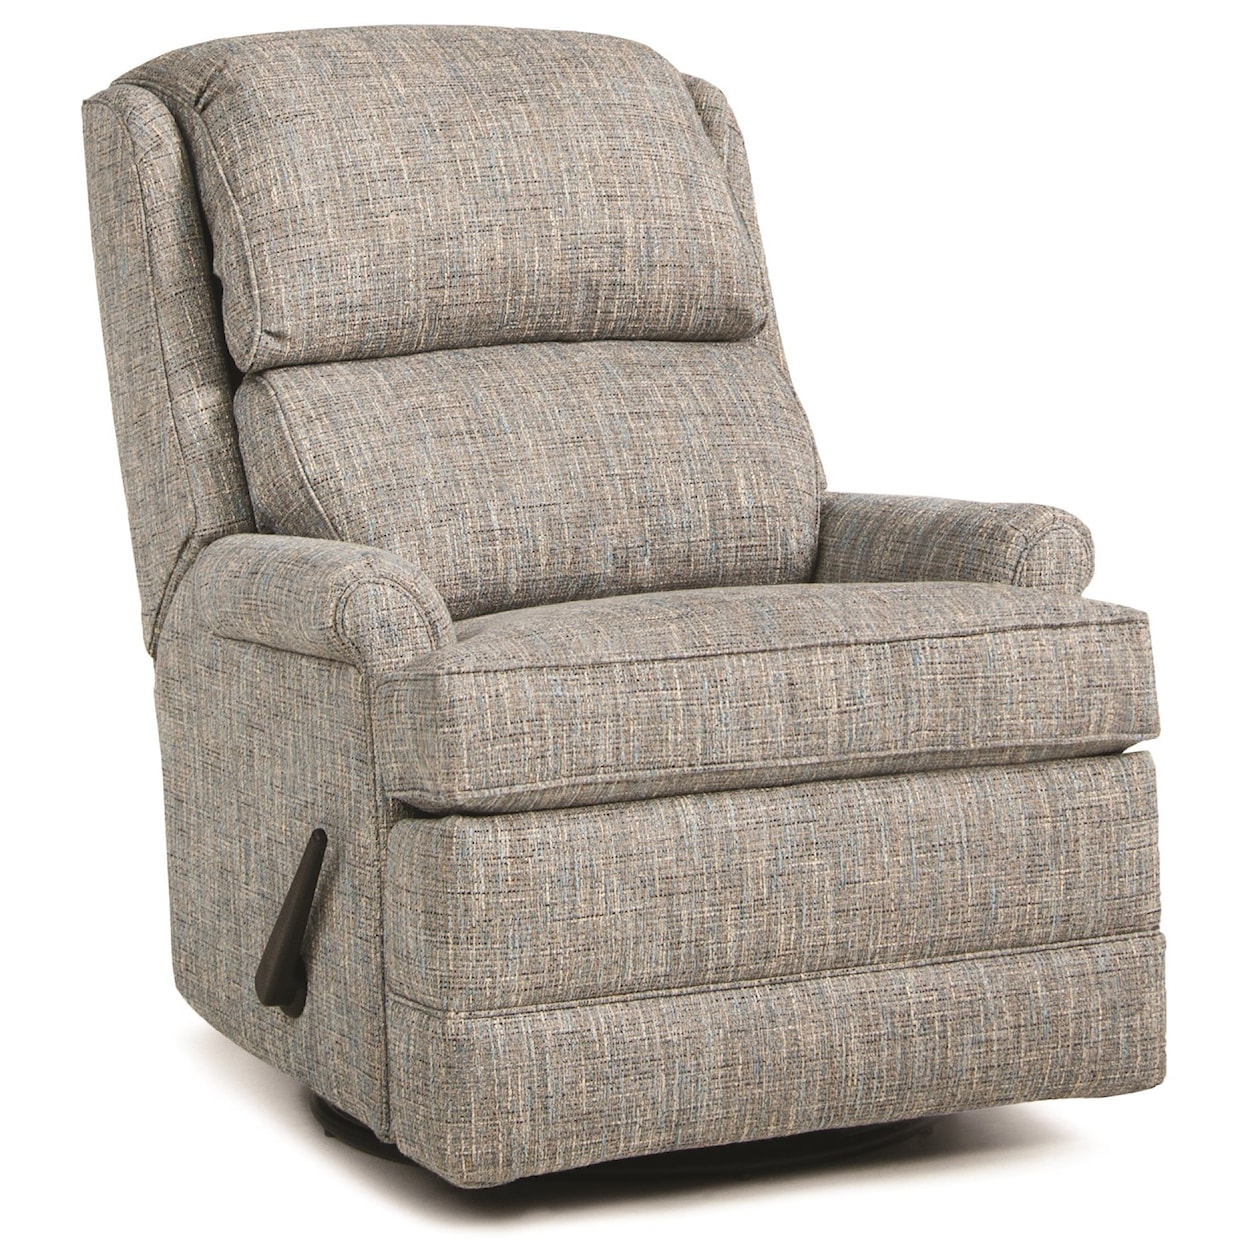 Smith Brothers 707 Swivel Glider Recliner